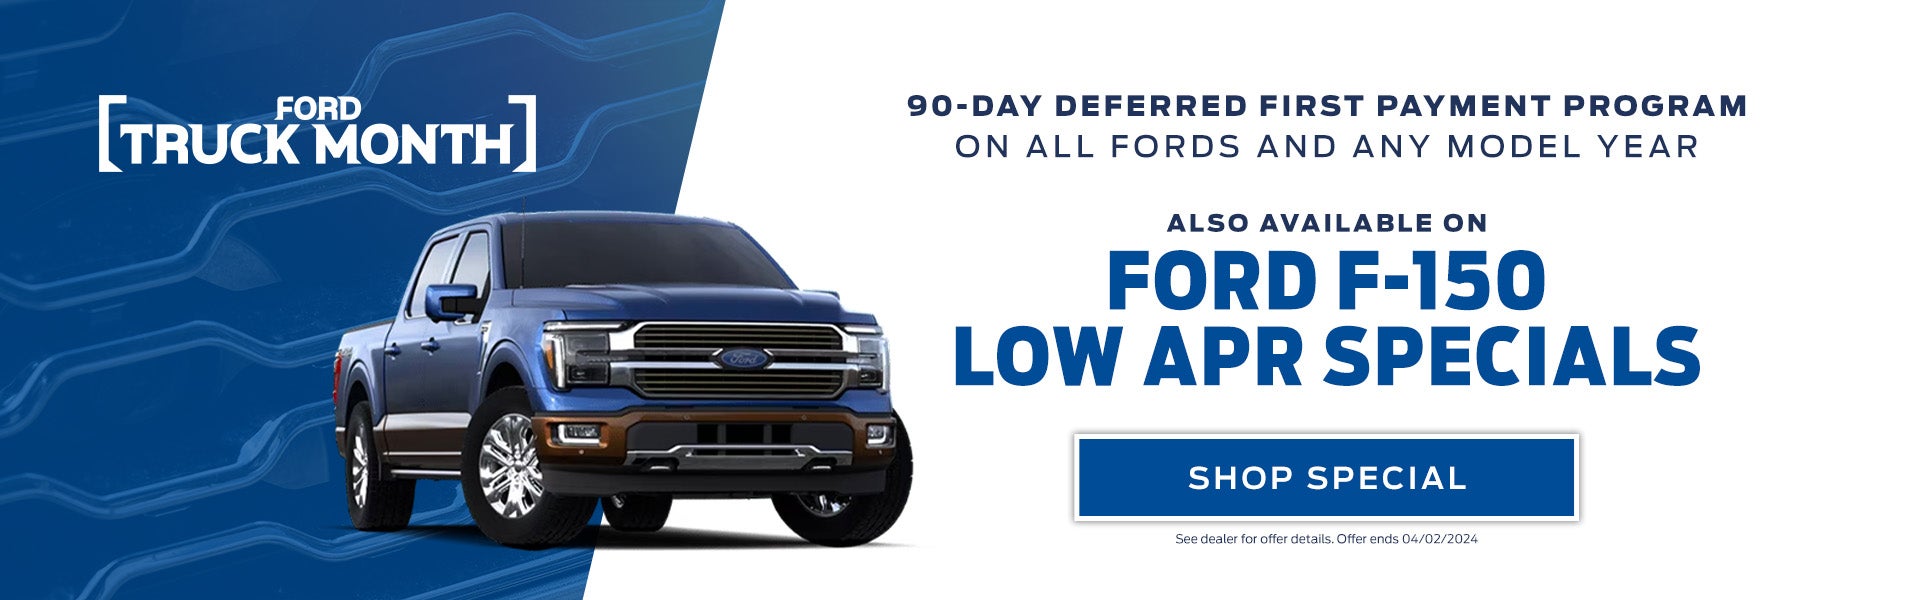 90 day deferred first payment program on all fords